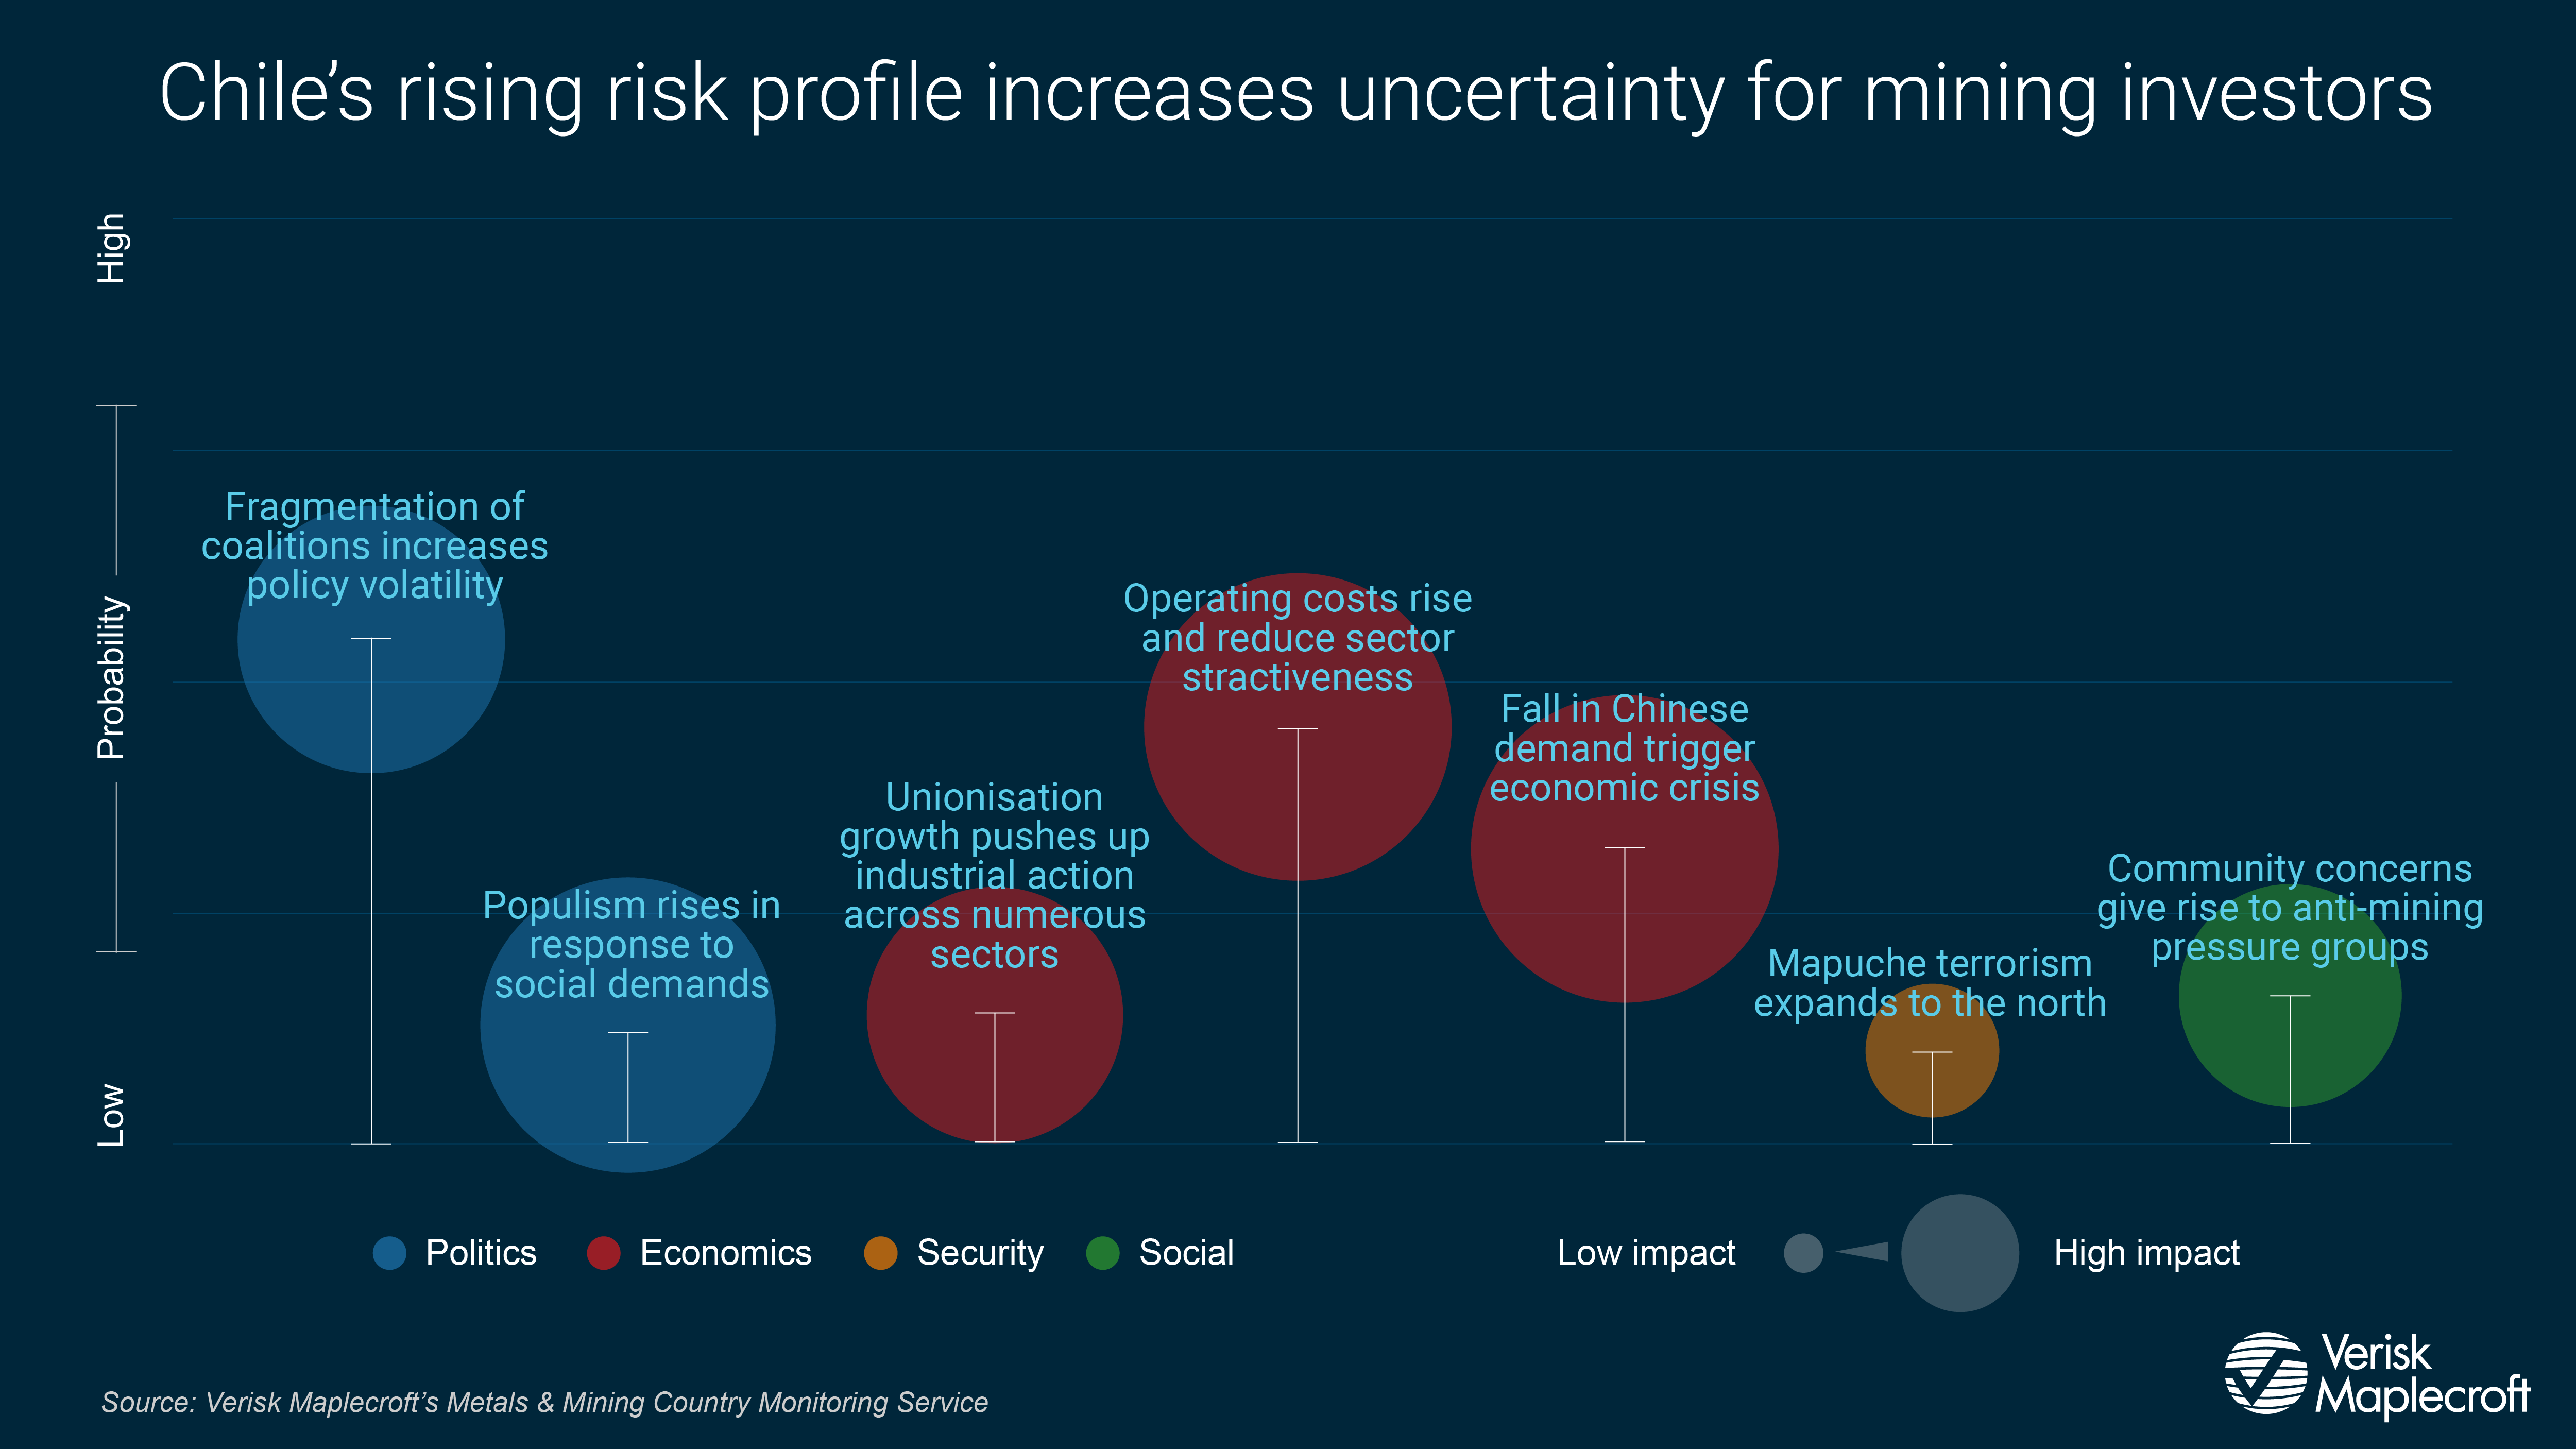 Chile's rising risk profile increases uncertainty for mining investors